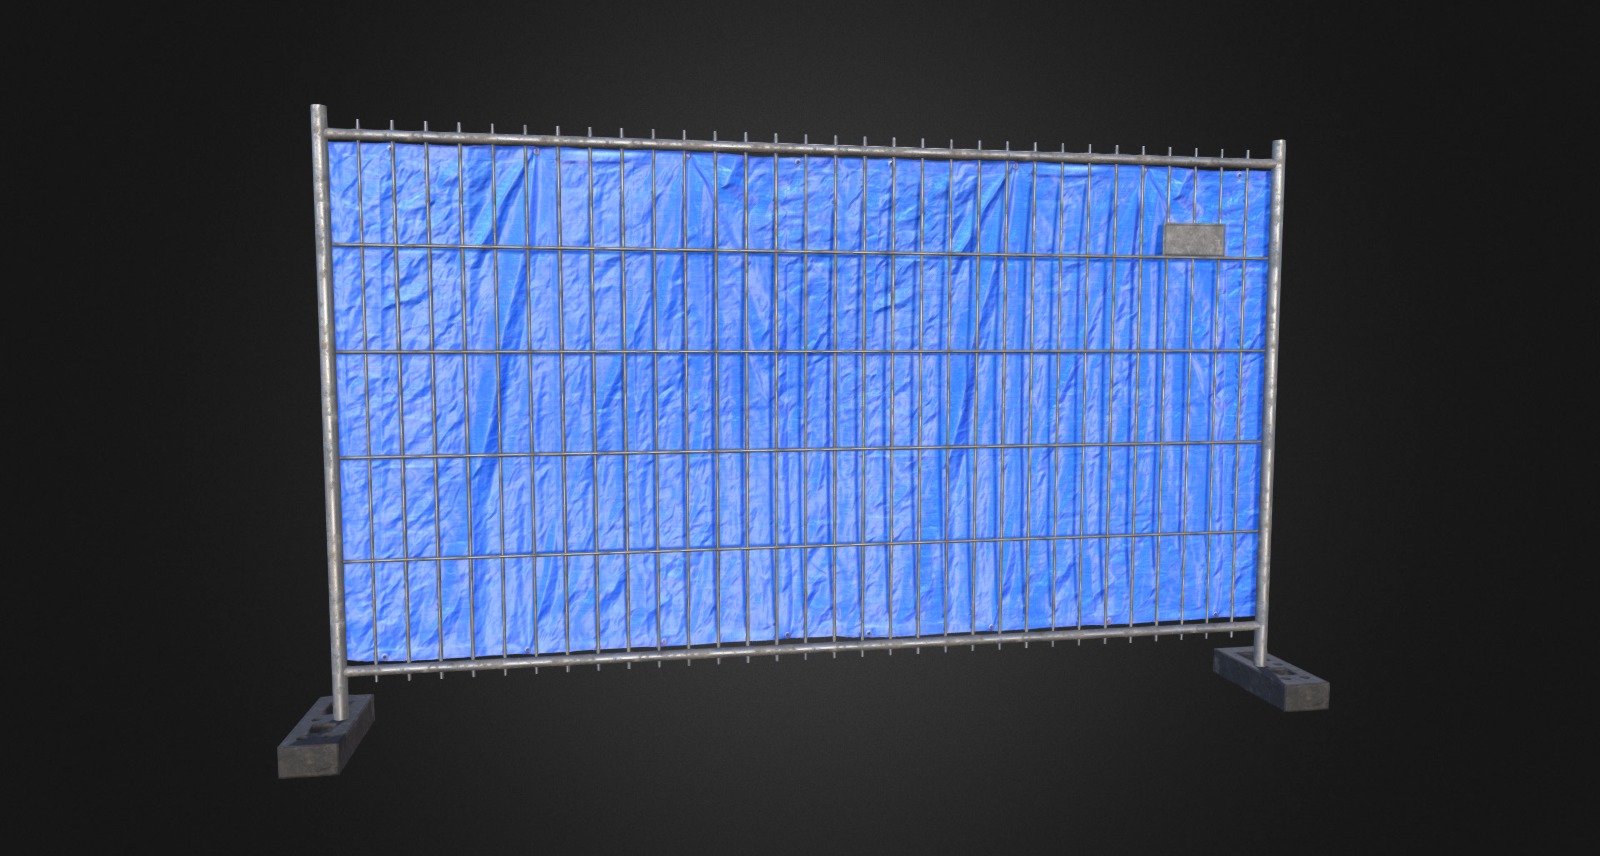 Construction Site Fence and Tarpaulin Blue for my Unreal Engine 4 collection.
- Verts: 600
- Tris: 986

Construction Site Fence:
- Verts: 564
- Tris: 936

Textures:
2048x2048 (Albedo, Normal, Roughness, Metallic)

Tarpaulin Blue:
- Verts: 36
- Tris: 50

Textures:
1024x1024 (Albedo, Normal, Roughness, Metallic) - Construction Site Fence + Tarpaulin Blue - 3D model by Longjing 3d model